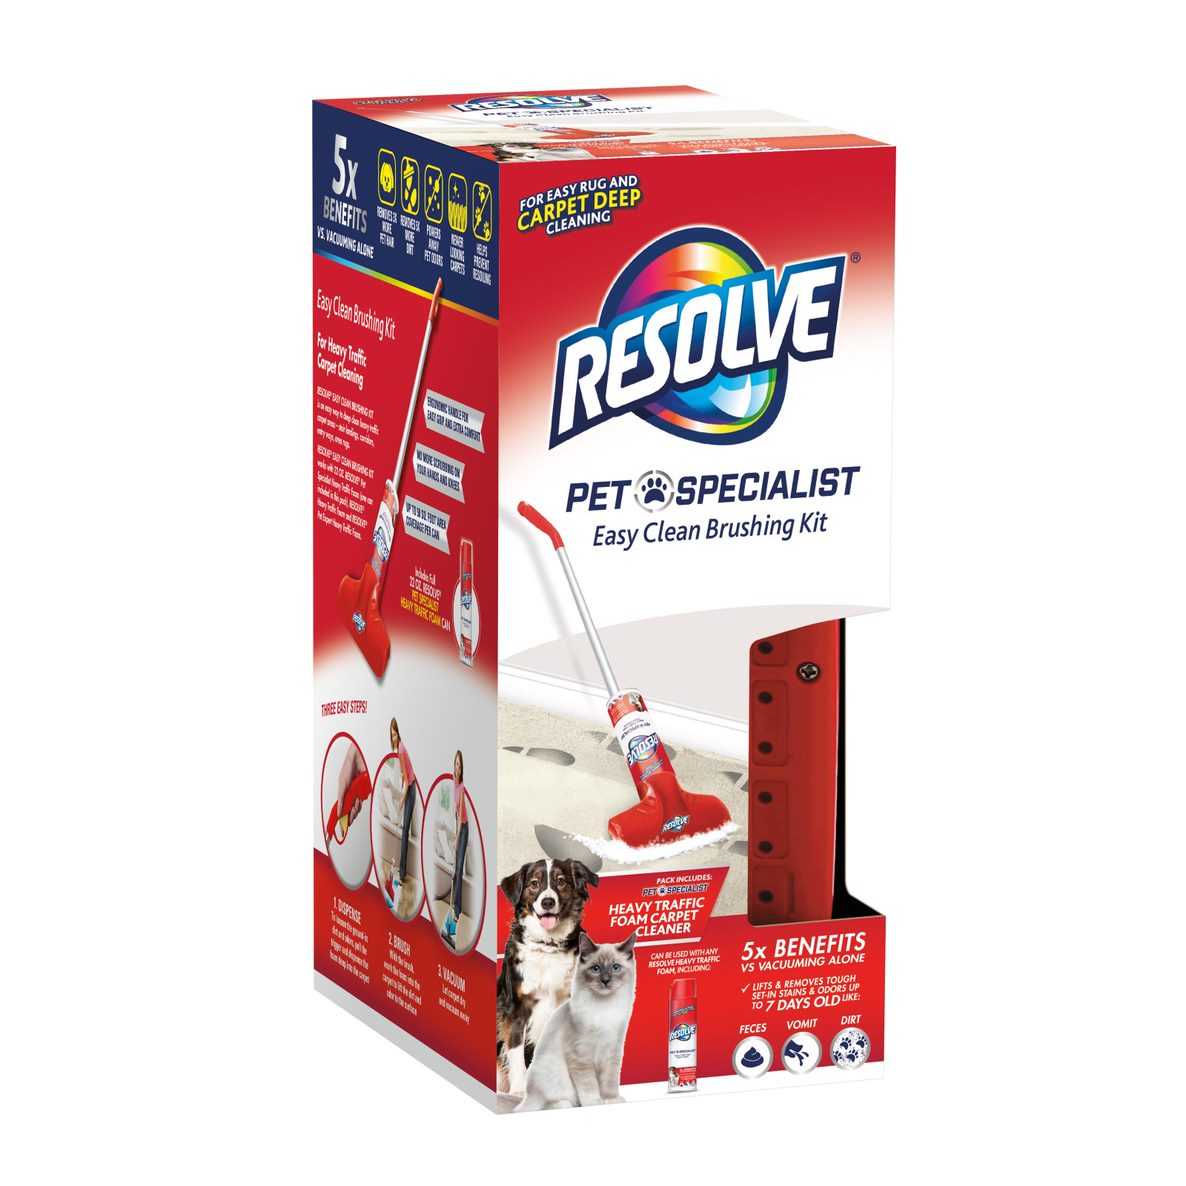 Resolve® Pet Specialist Easy Clean Brushing Kit